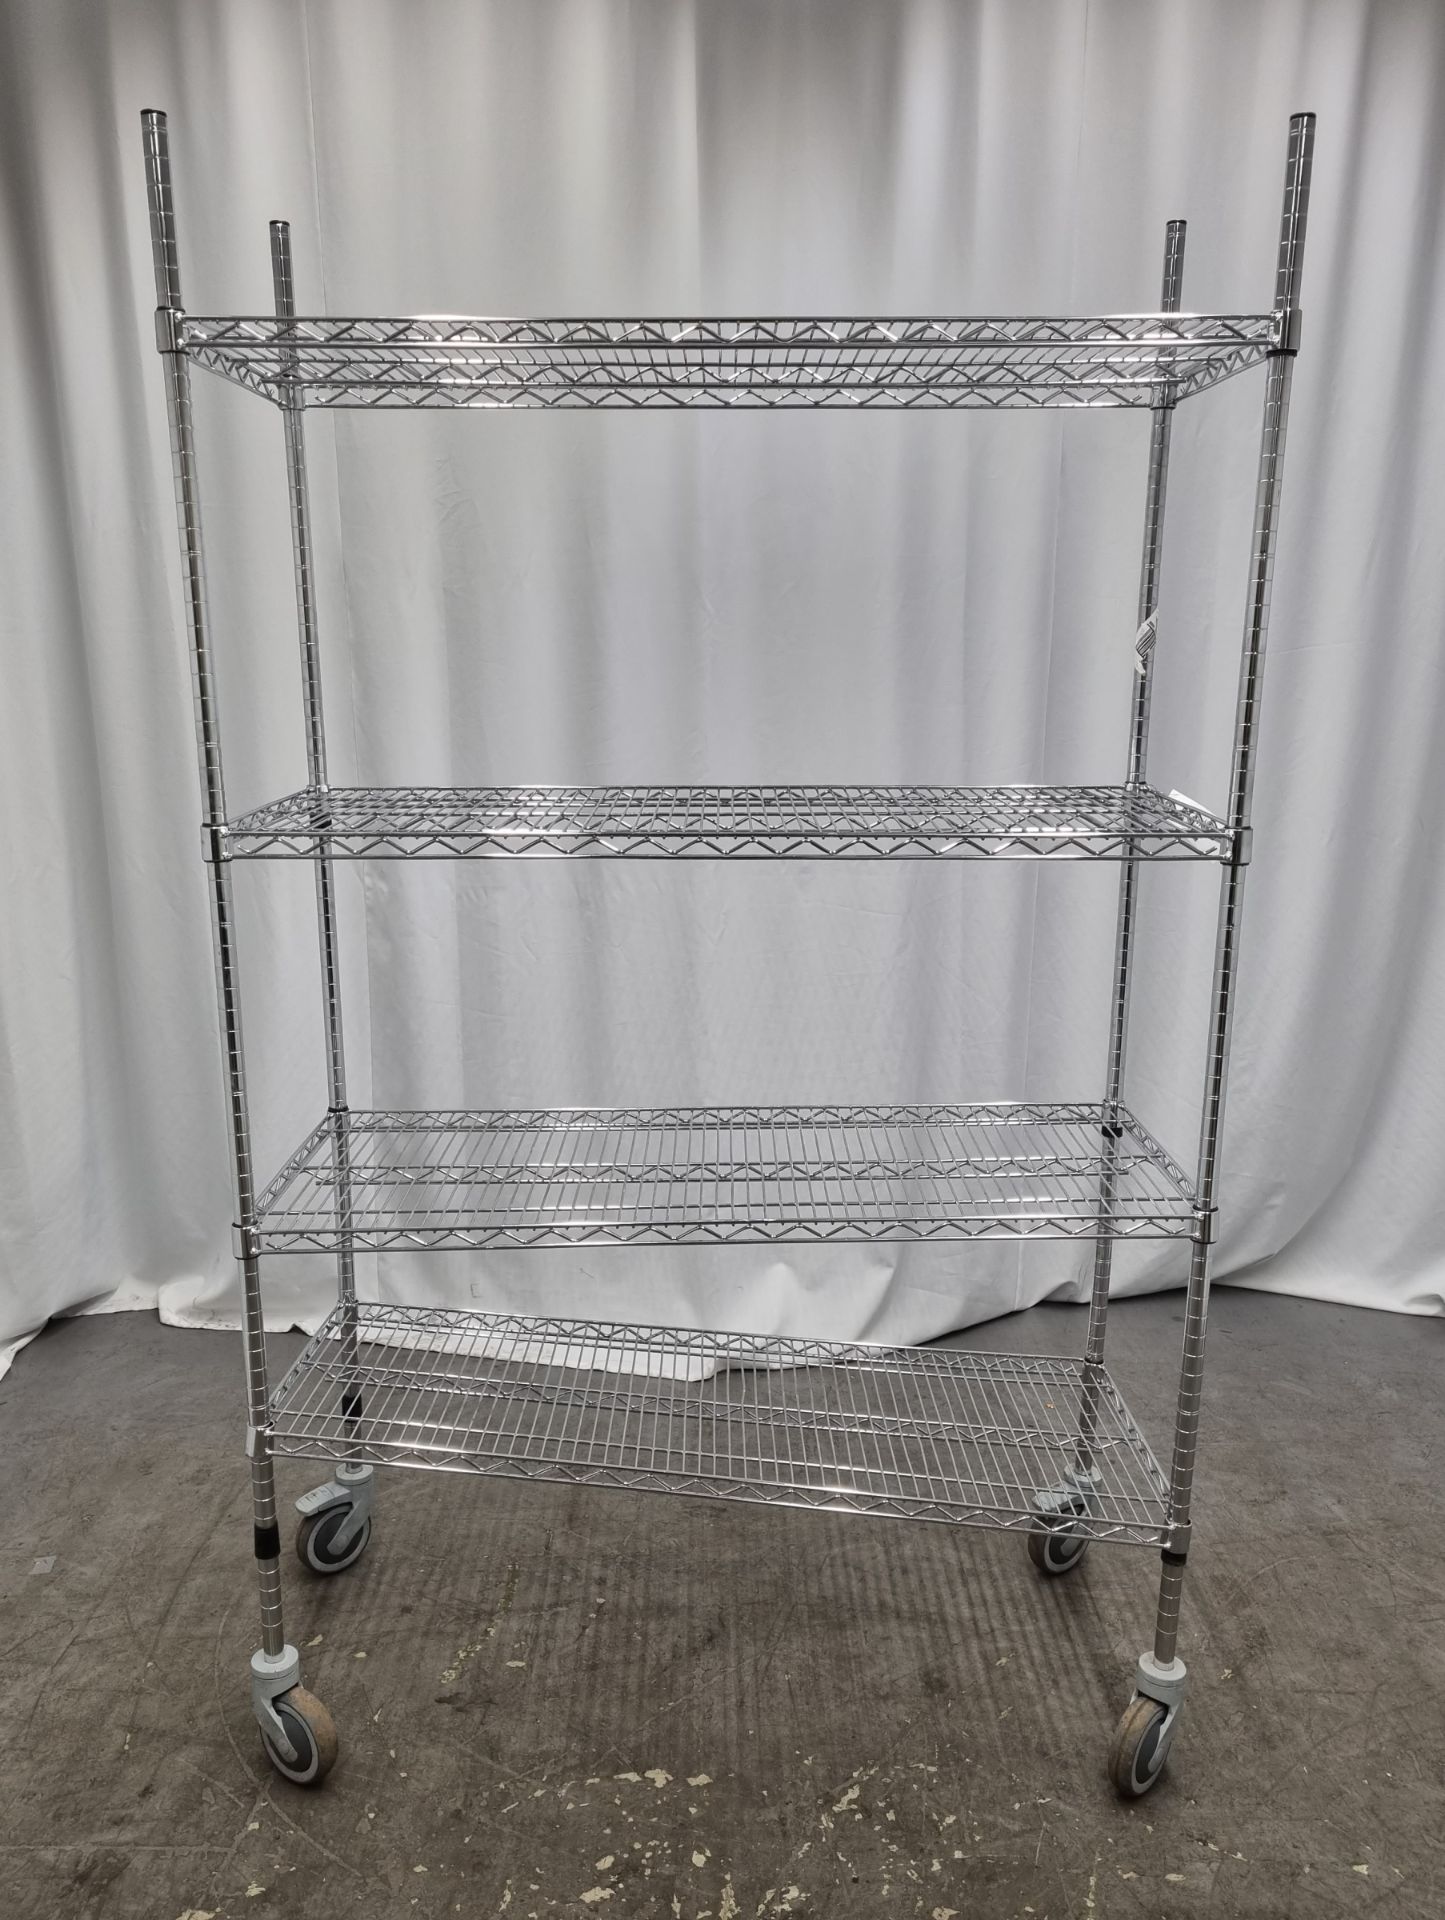 Stainless steel catering racking 4 x shelf on wheels - Image 4 of 5